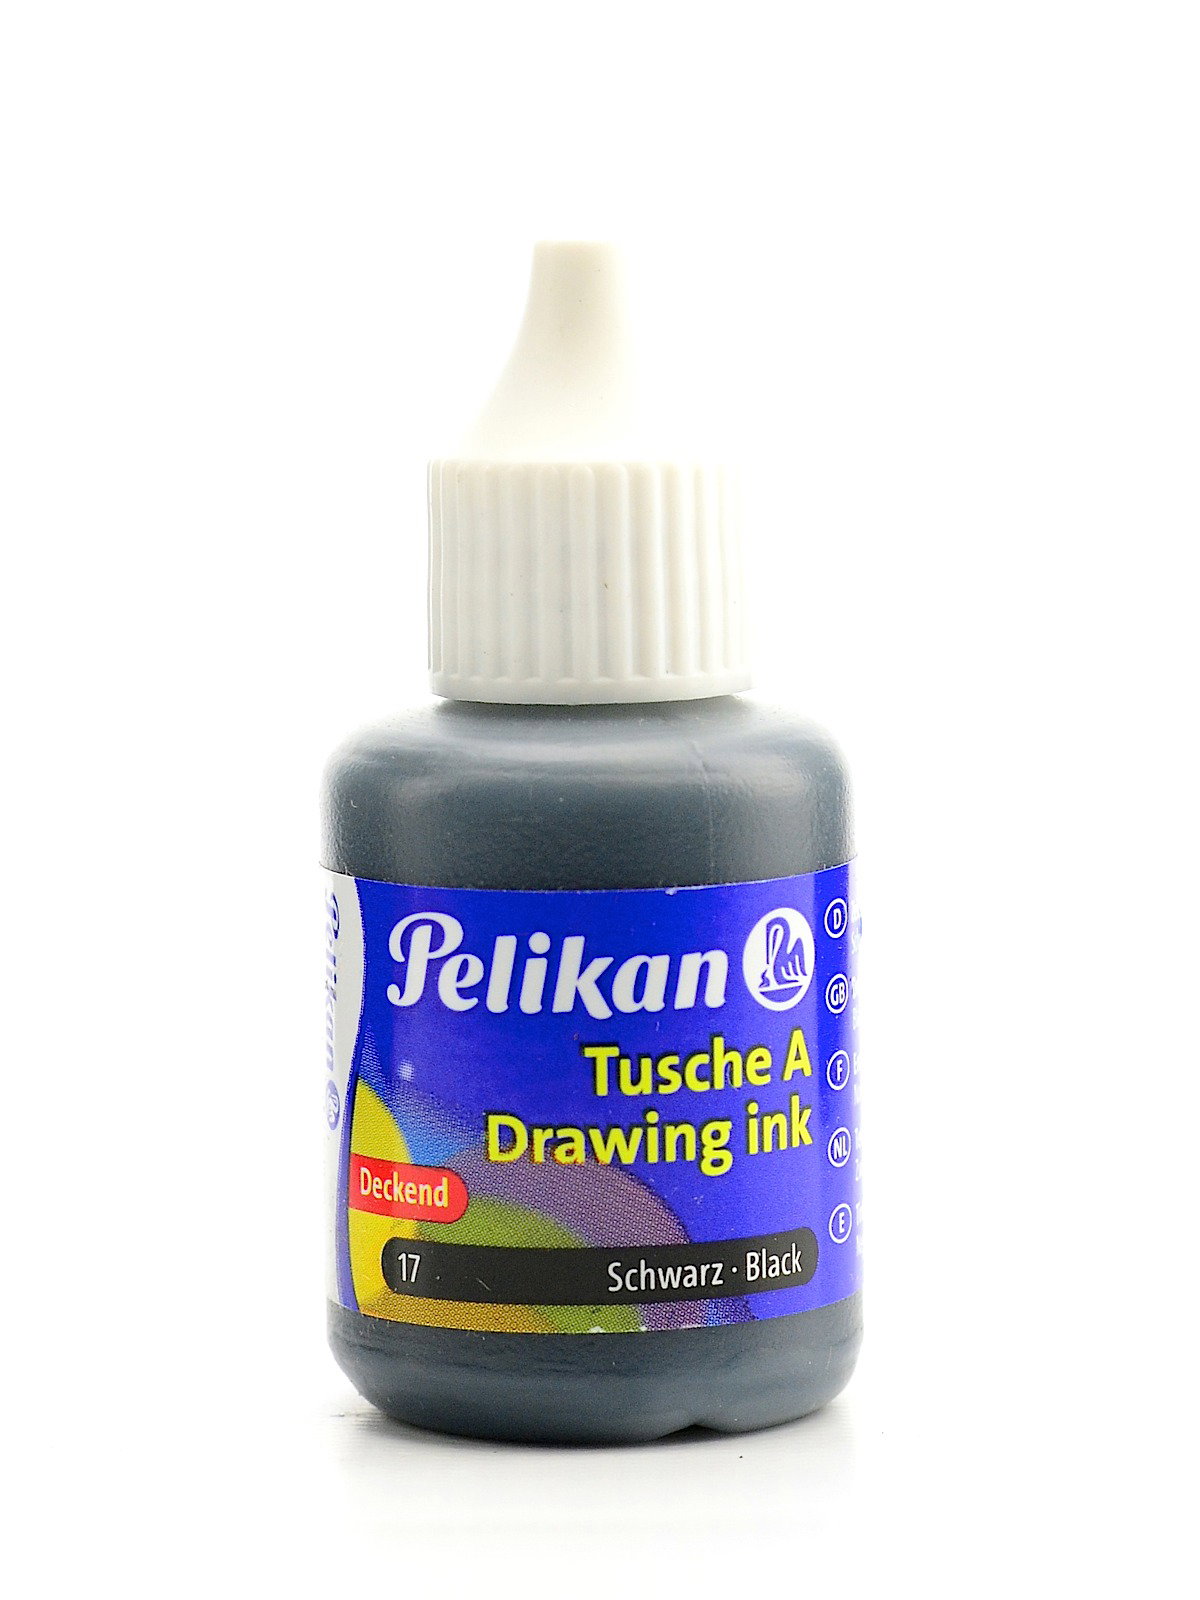 Drawing Ink